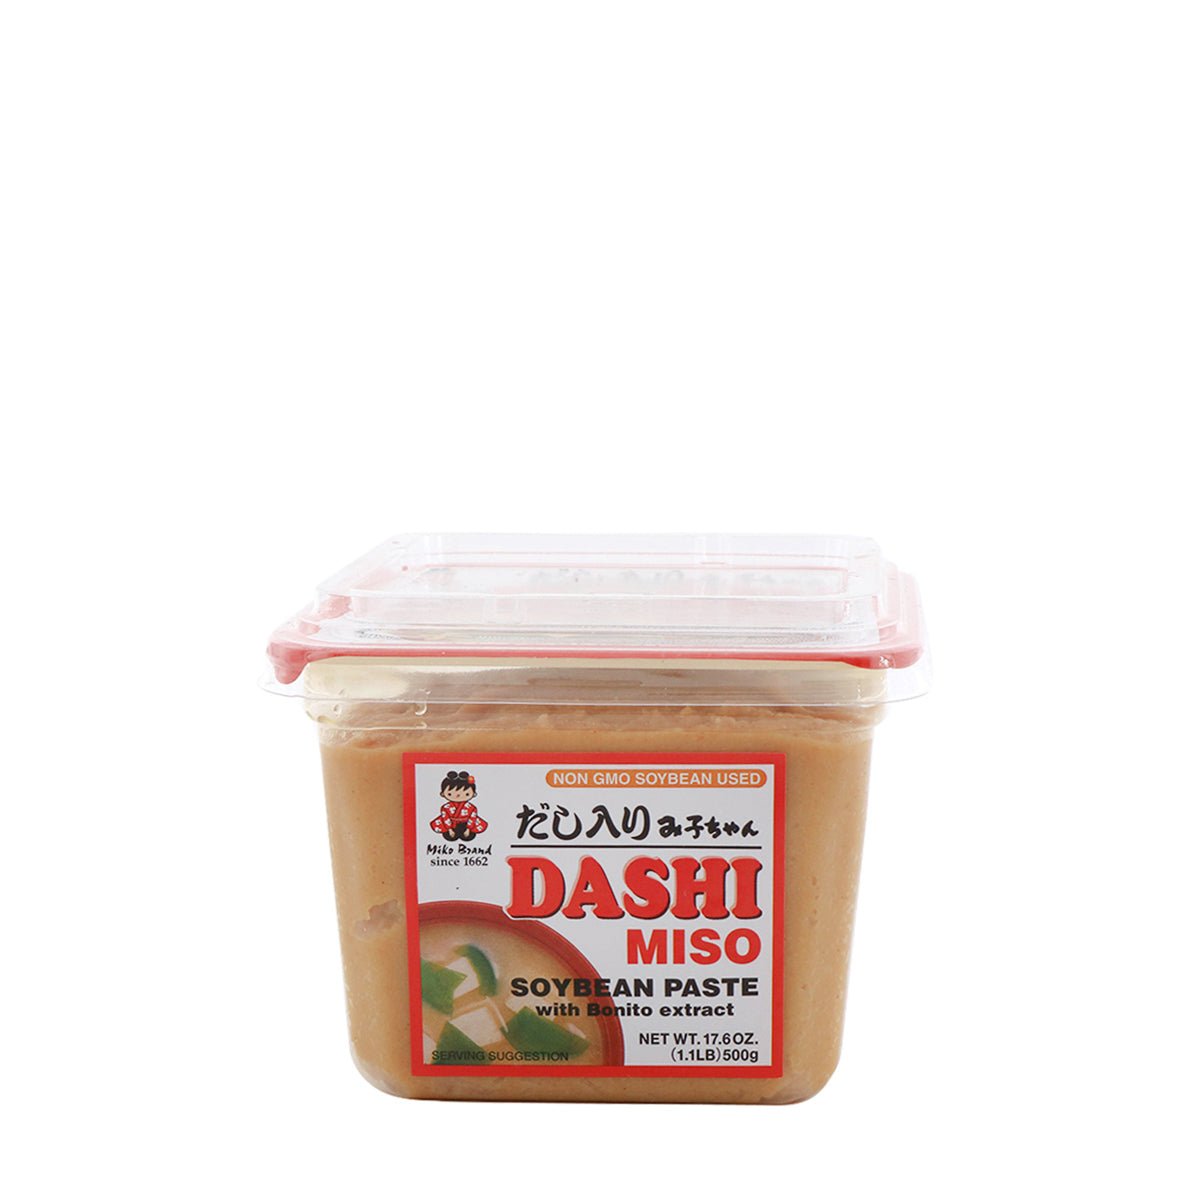 Does Miso Paste Need To Be Refrigerated?